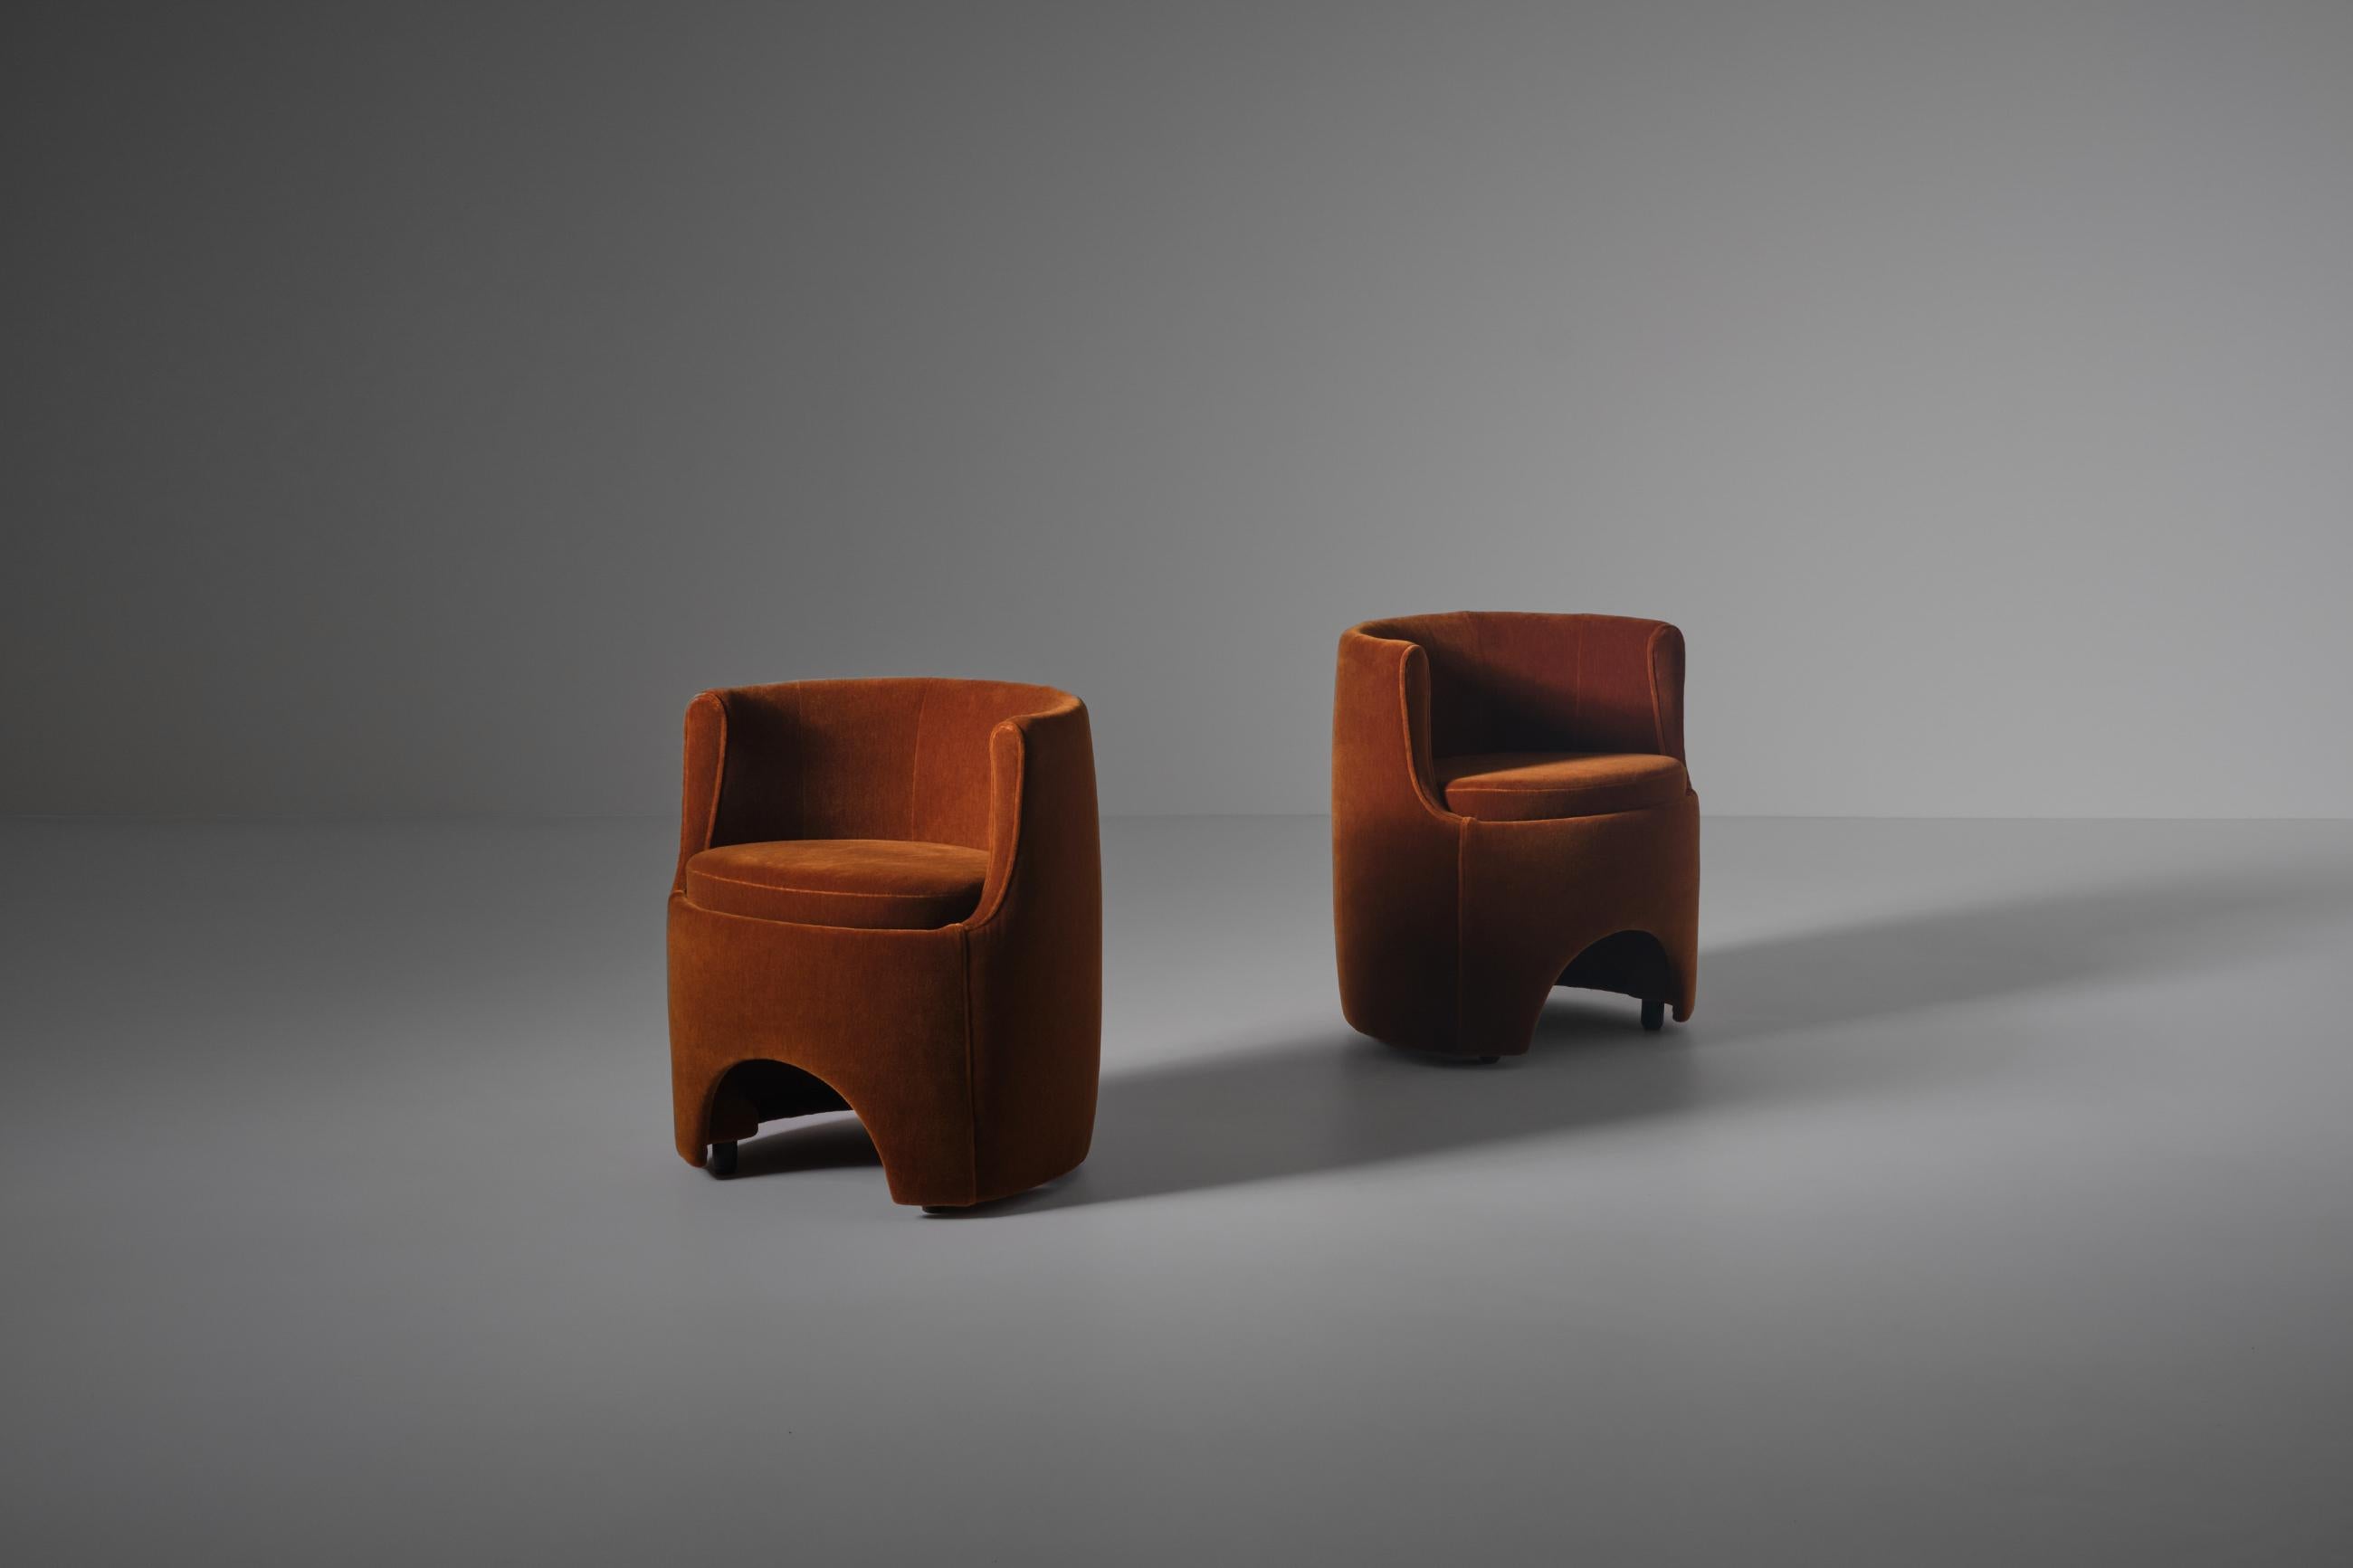 Pair of model 'P22 studio' chairs by Luigi Caccia Dominioni for Azucena, Milan 1975. The chairs are upholstered in a warm burnt orange Mohair velvet. Very nice rounded shapes which asks for refined upholstery skills, these details give the chairs a